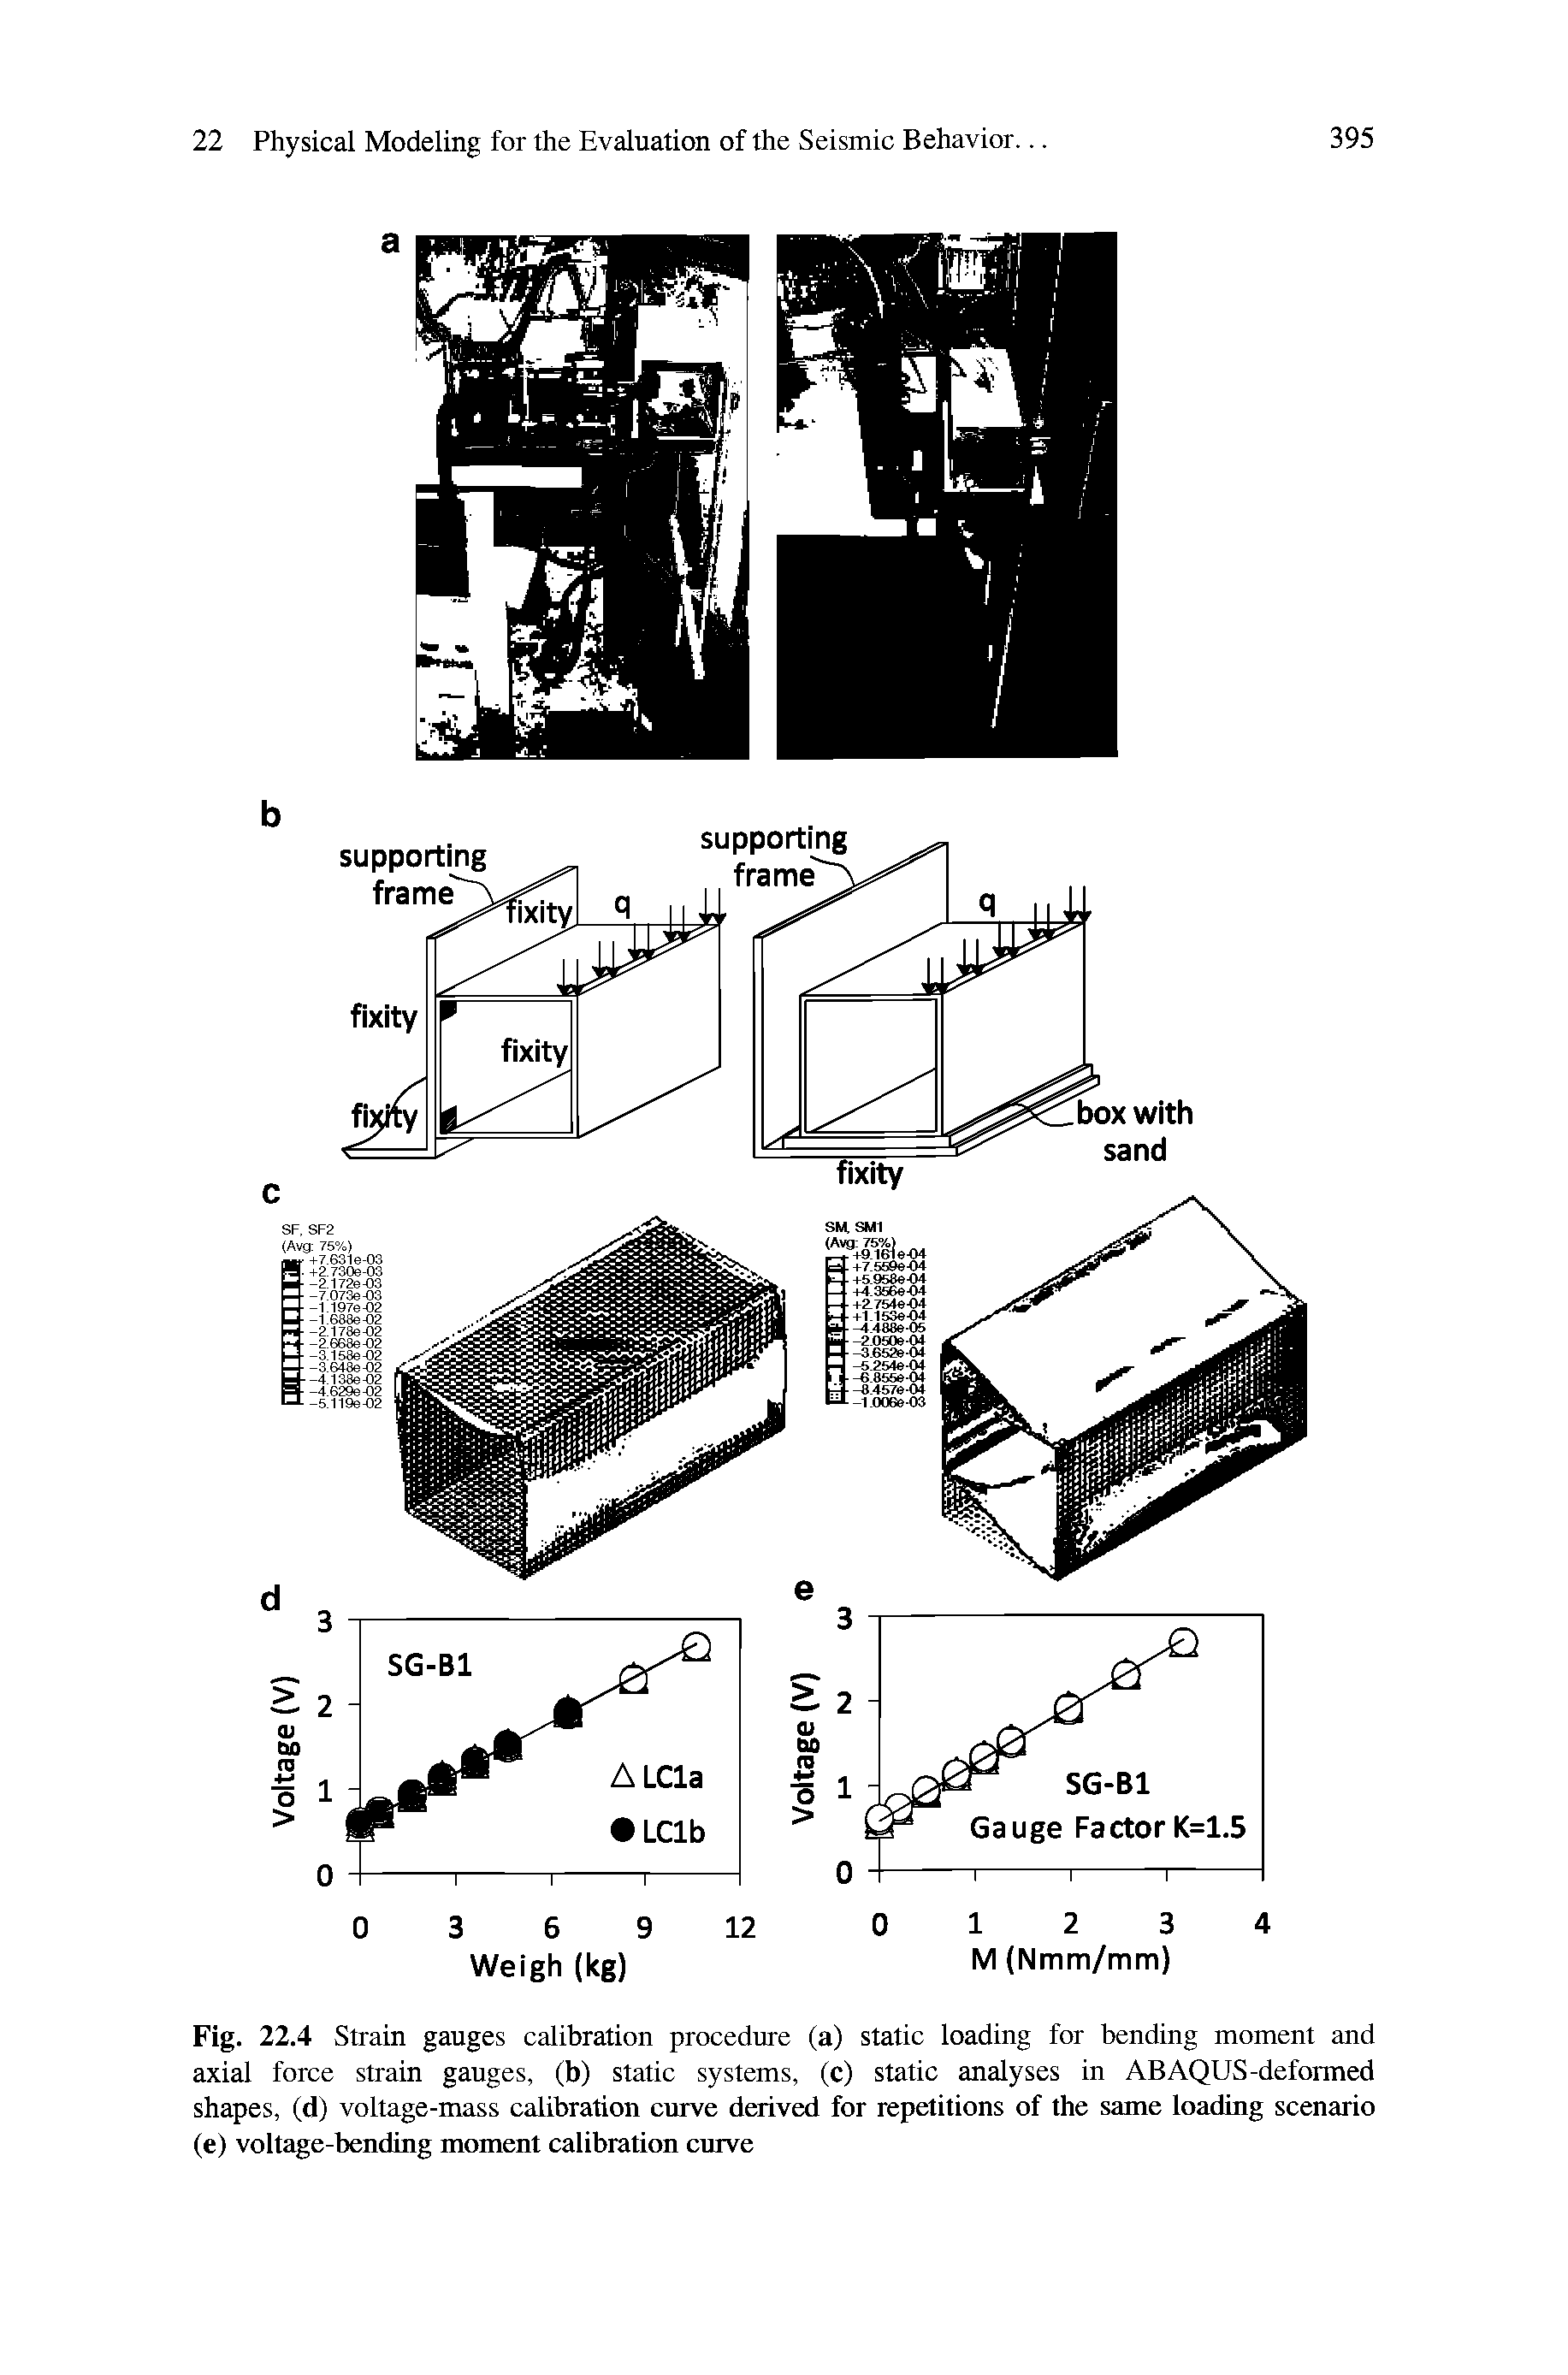 Fig. 22.4 Strain gauges calibration procedure (a) static loading for bending moment and axial force strain gauges, (b) static systems, (c) static analyses in ABAQUS-deformed shapes, (d) voltage-mass calibration curve derived for repetitions of the same loading scenario (e) voltage-bending moment calibration curve...